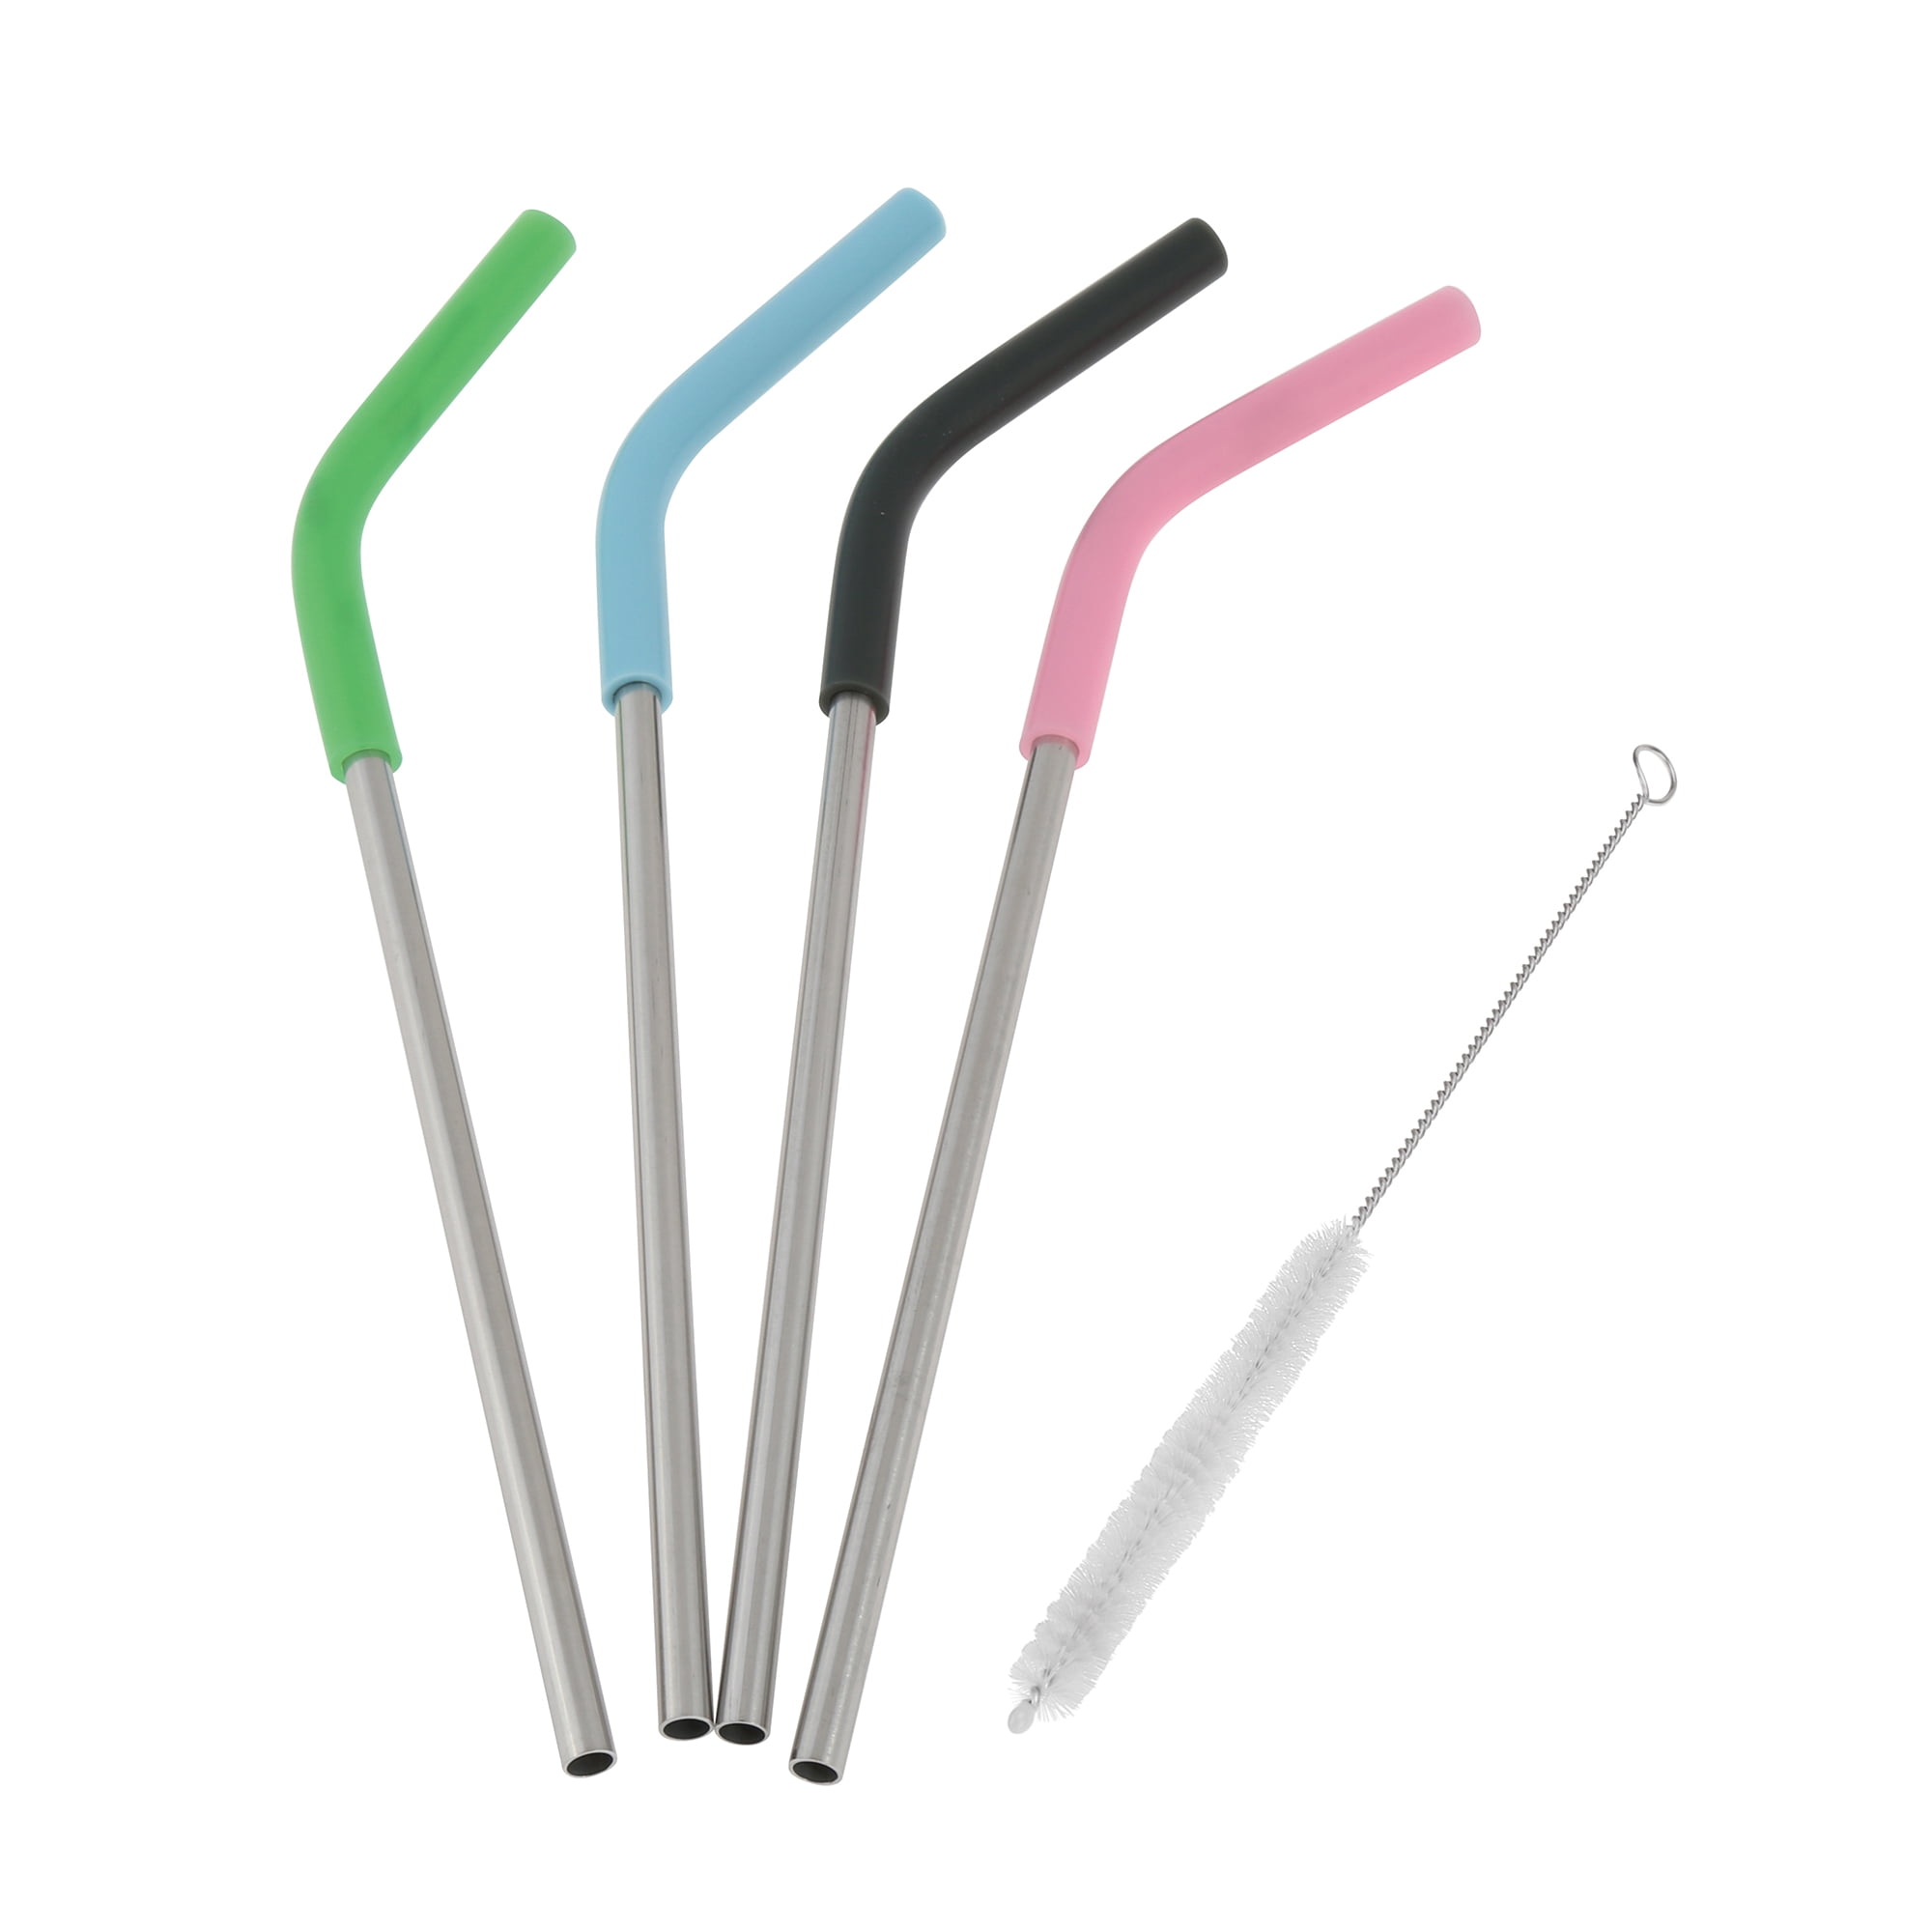 [24 PCS] Value Pack Reusable Stainless Steel Straws in Bulk Extra Long 10.4  inch Colorful,Tomorotec Metal Straw Sets with Cleaning Brushes,12 Straight